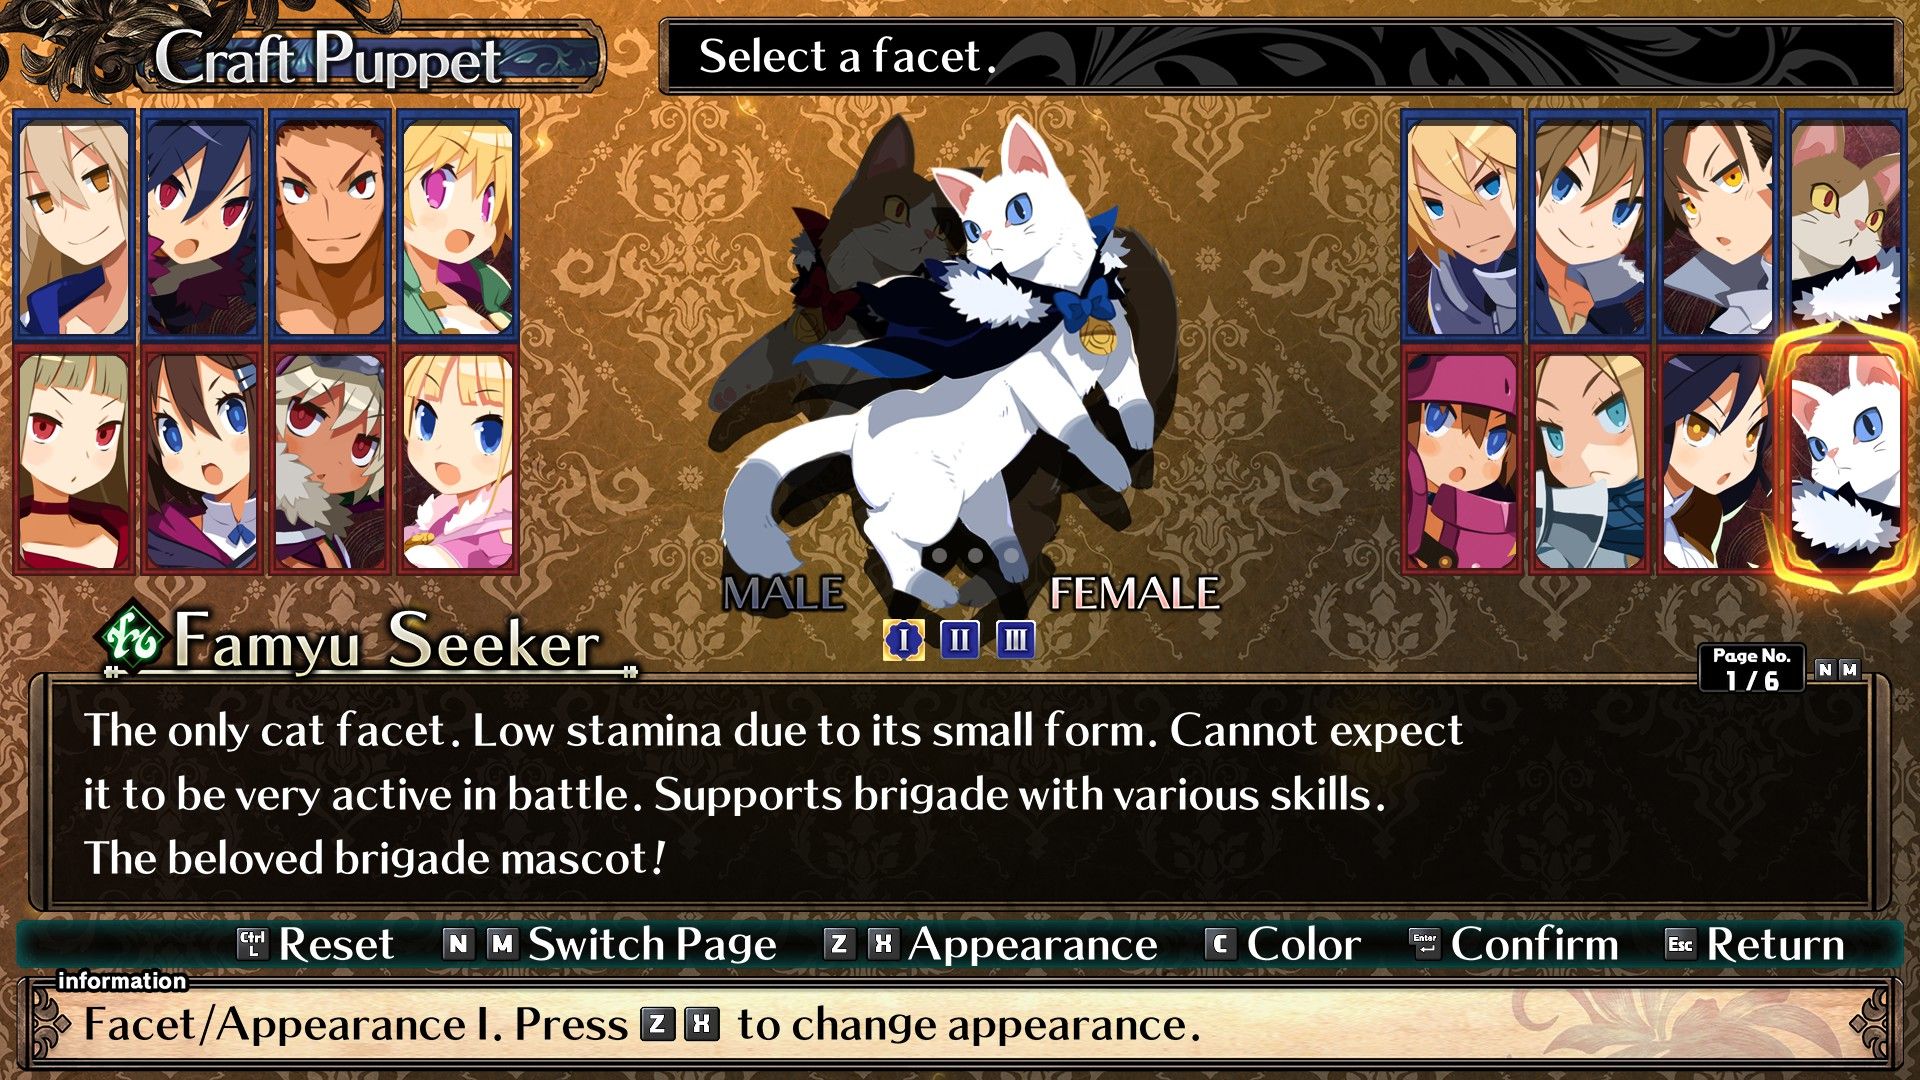 Labyrinth Of Galleria: The Moon Society Famyu Seeker character creation screen showing the female character and class description.